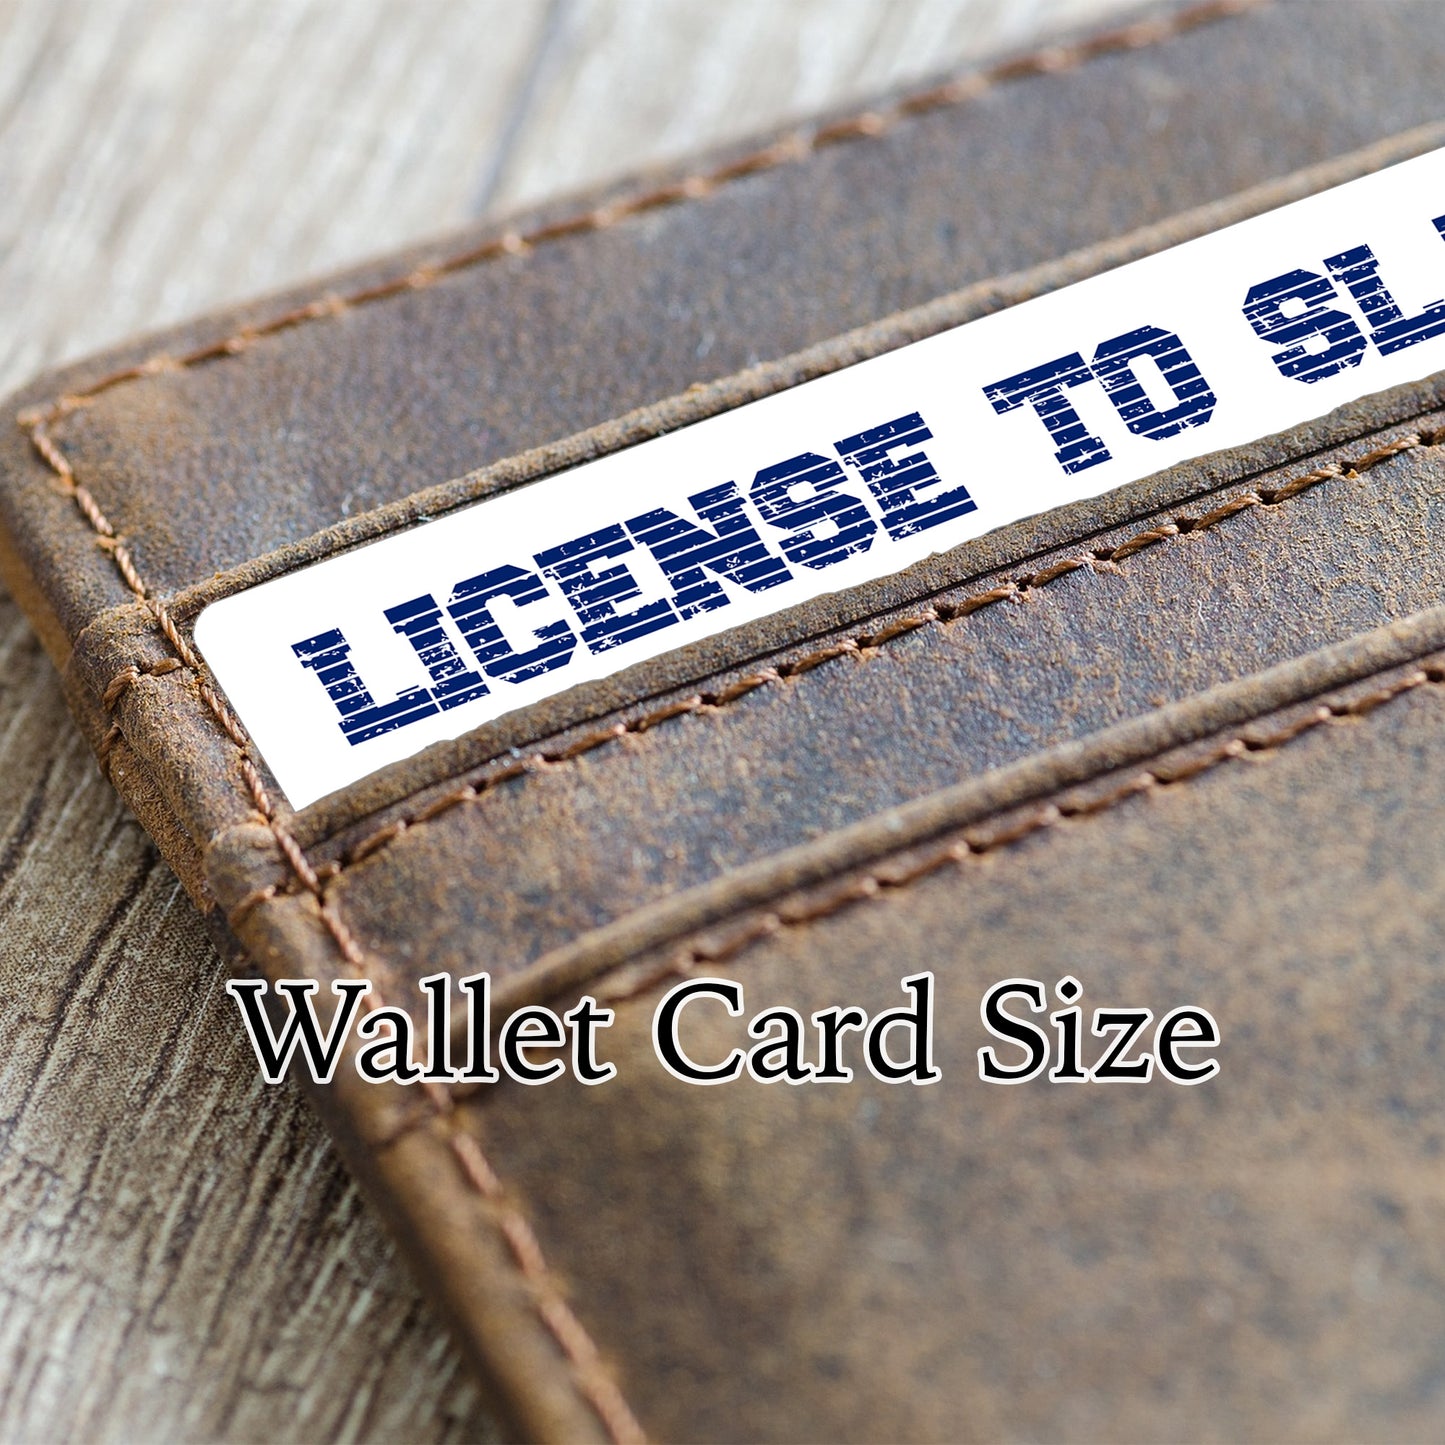 Non Binary pride personalised license to slay card